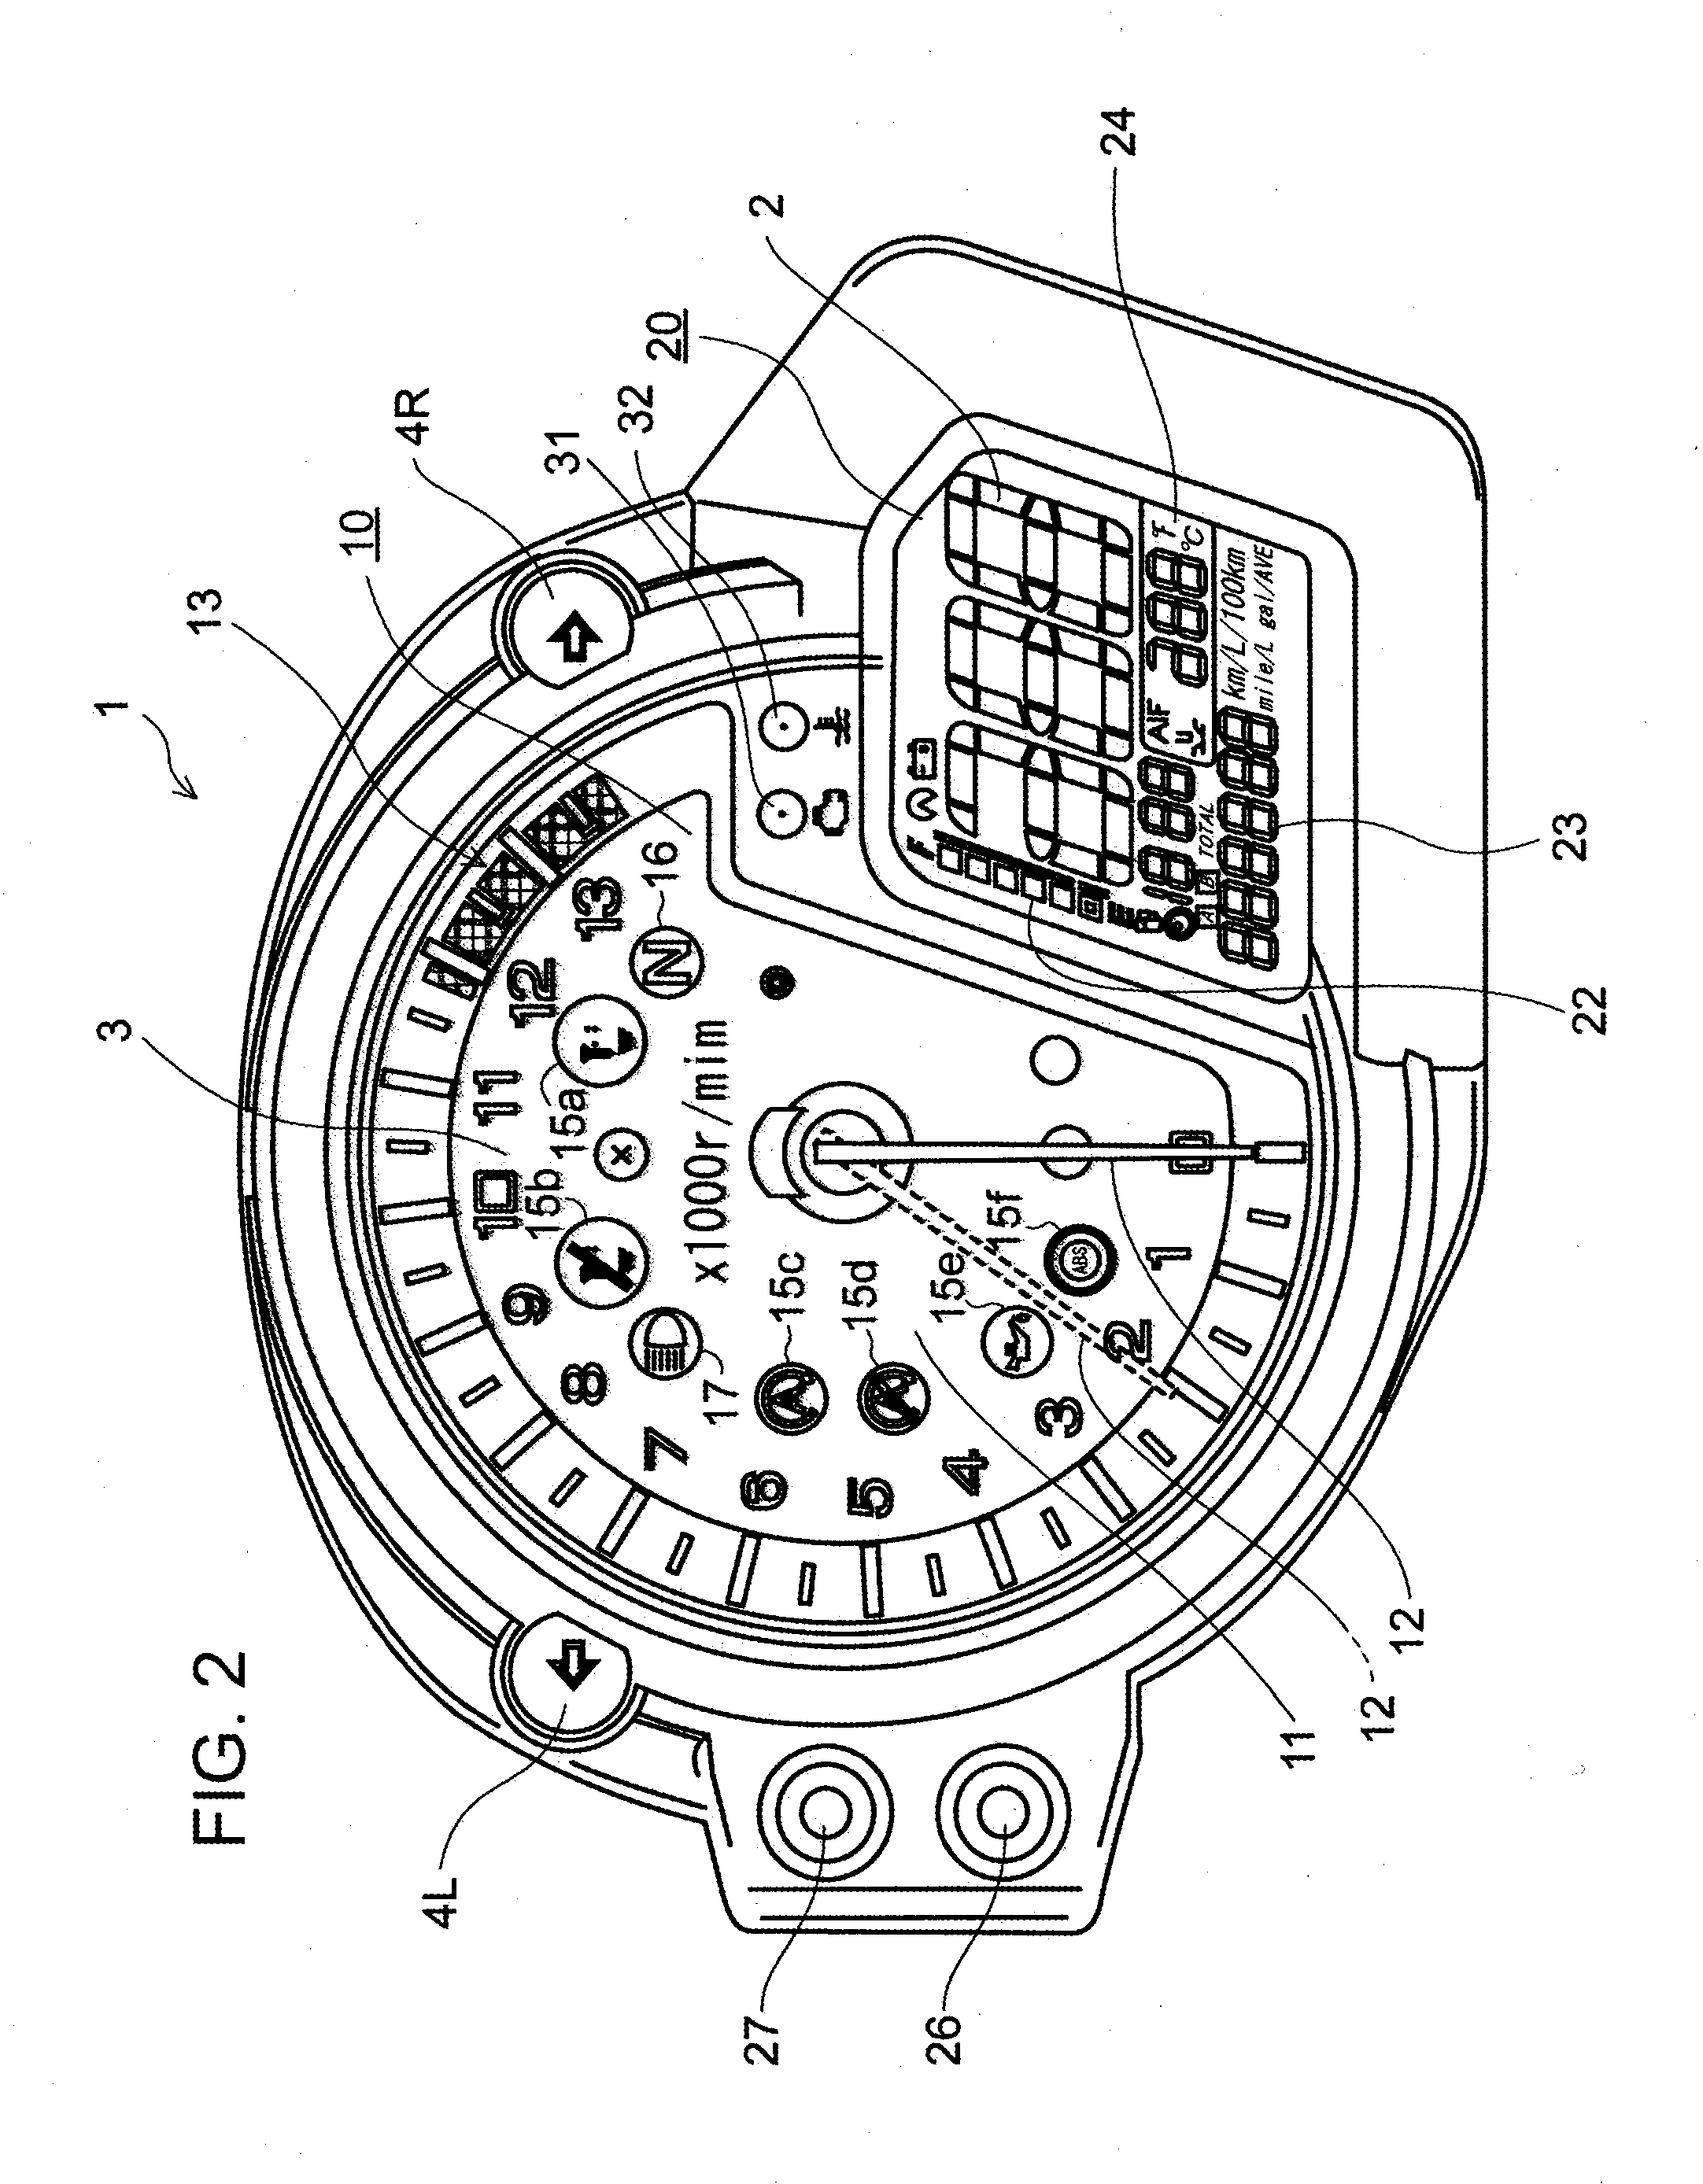 Traction control display device for vehicle